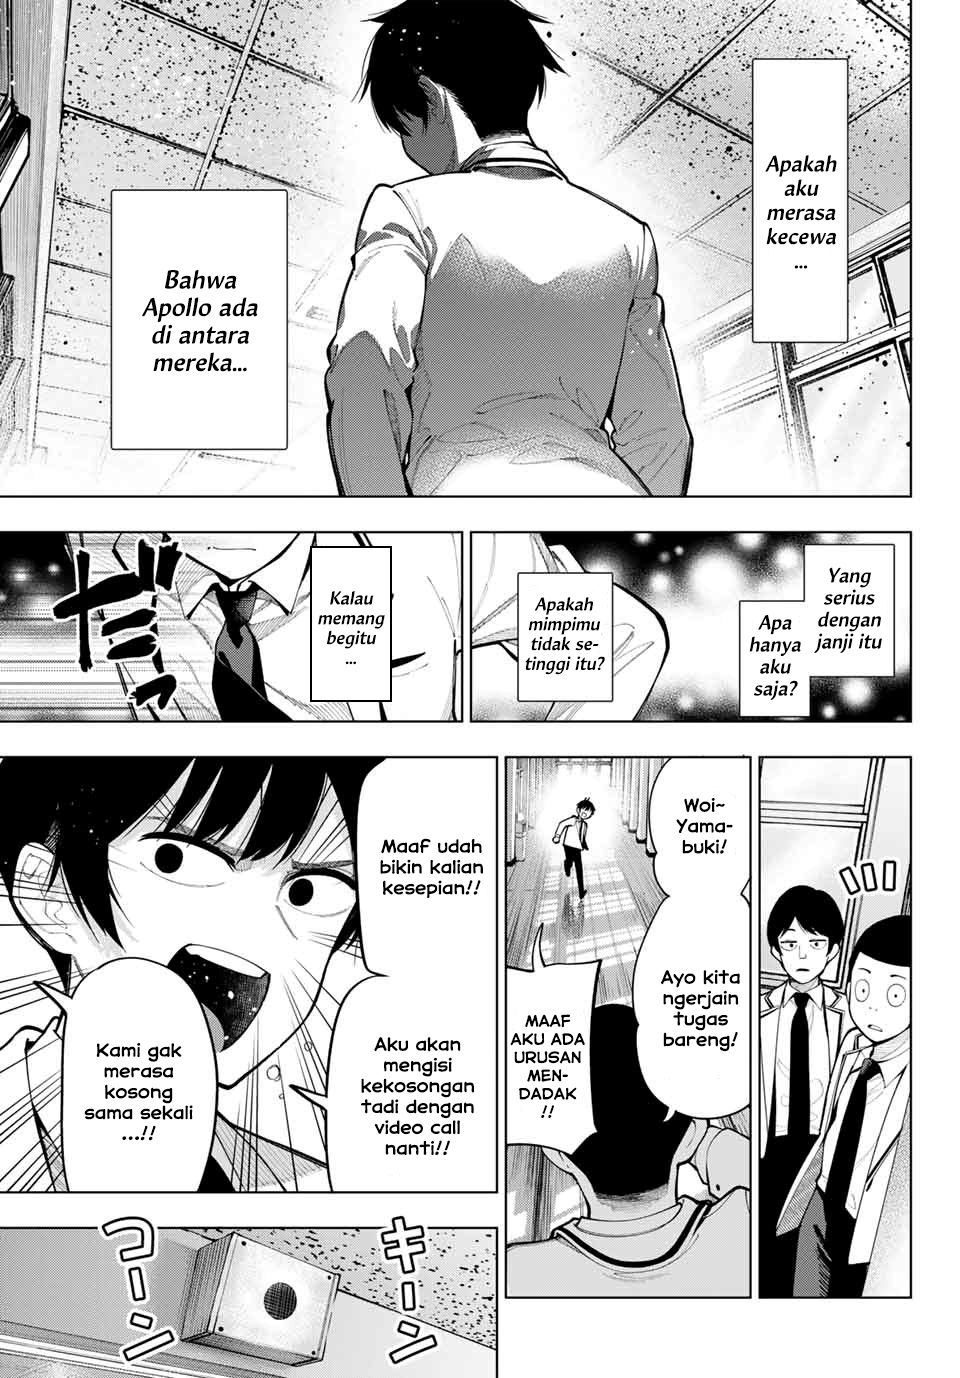 Mayonaka Heart Tune (Tune In to the Midnight Heart) Chapter 02 Image 32